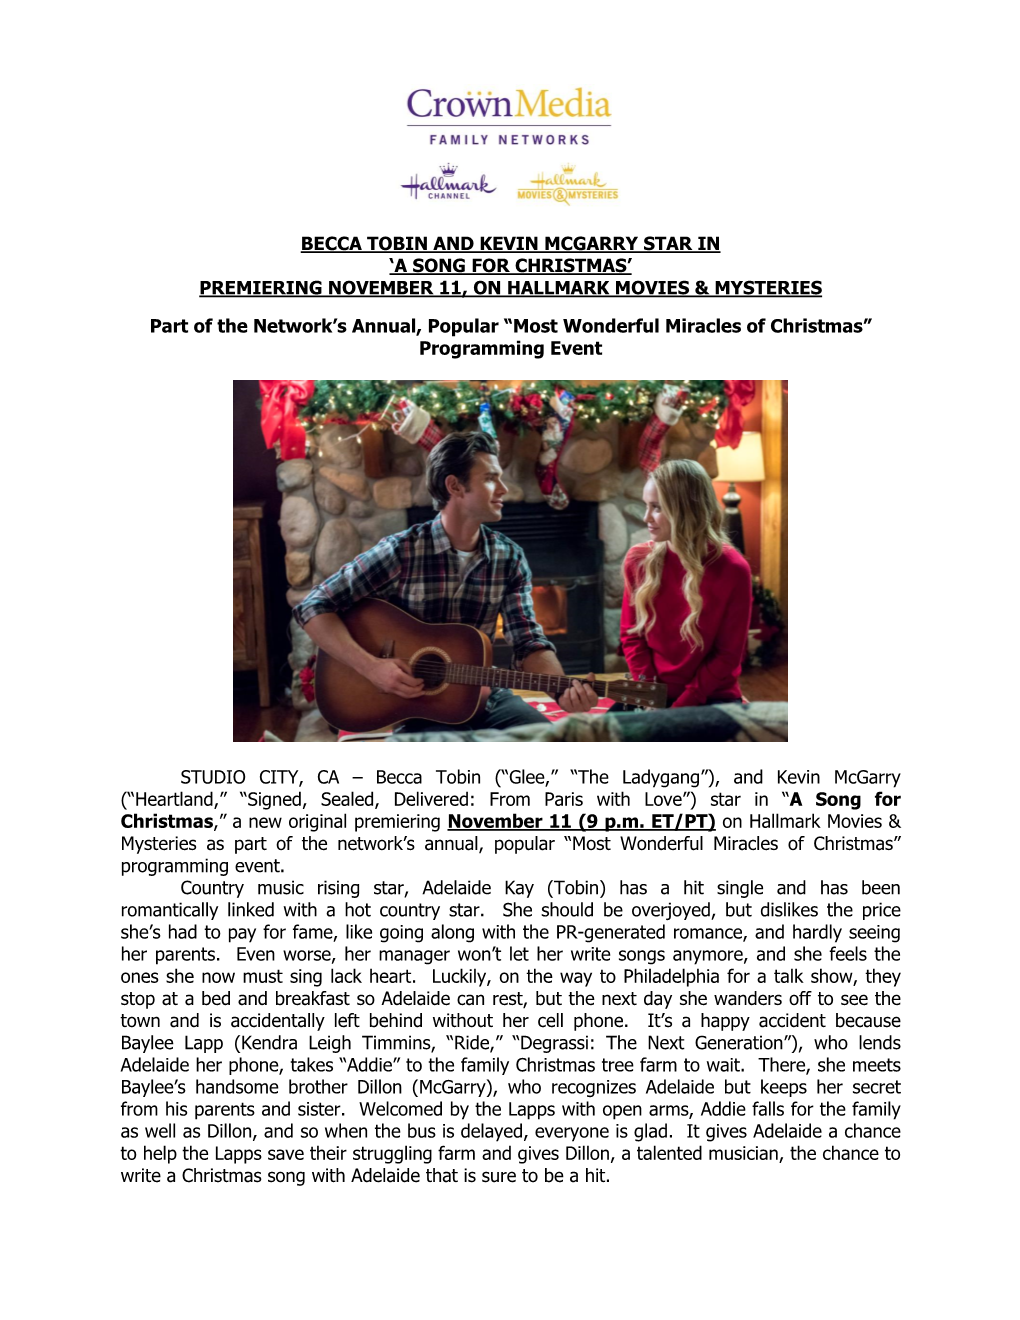 Becca Tobin and Kevin Mcgarry Star in ‘A Song for Christmas’ Premiering November 11, on Hallmark Movies & Mysteries